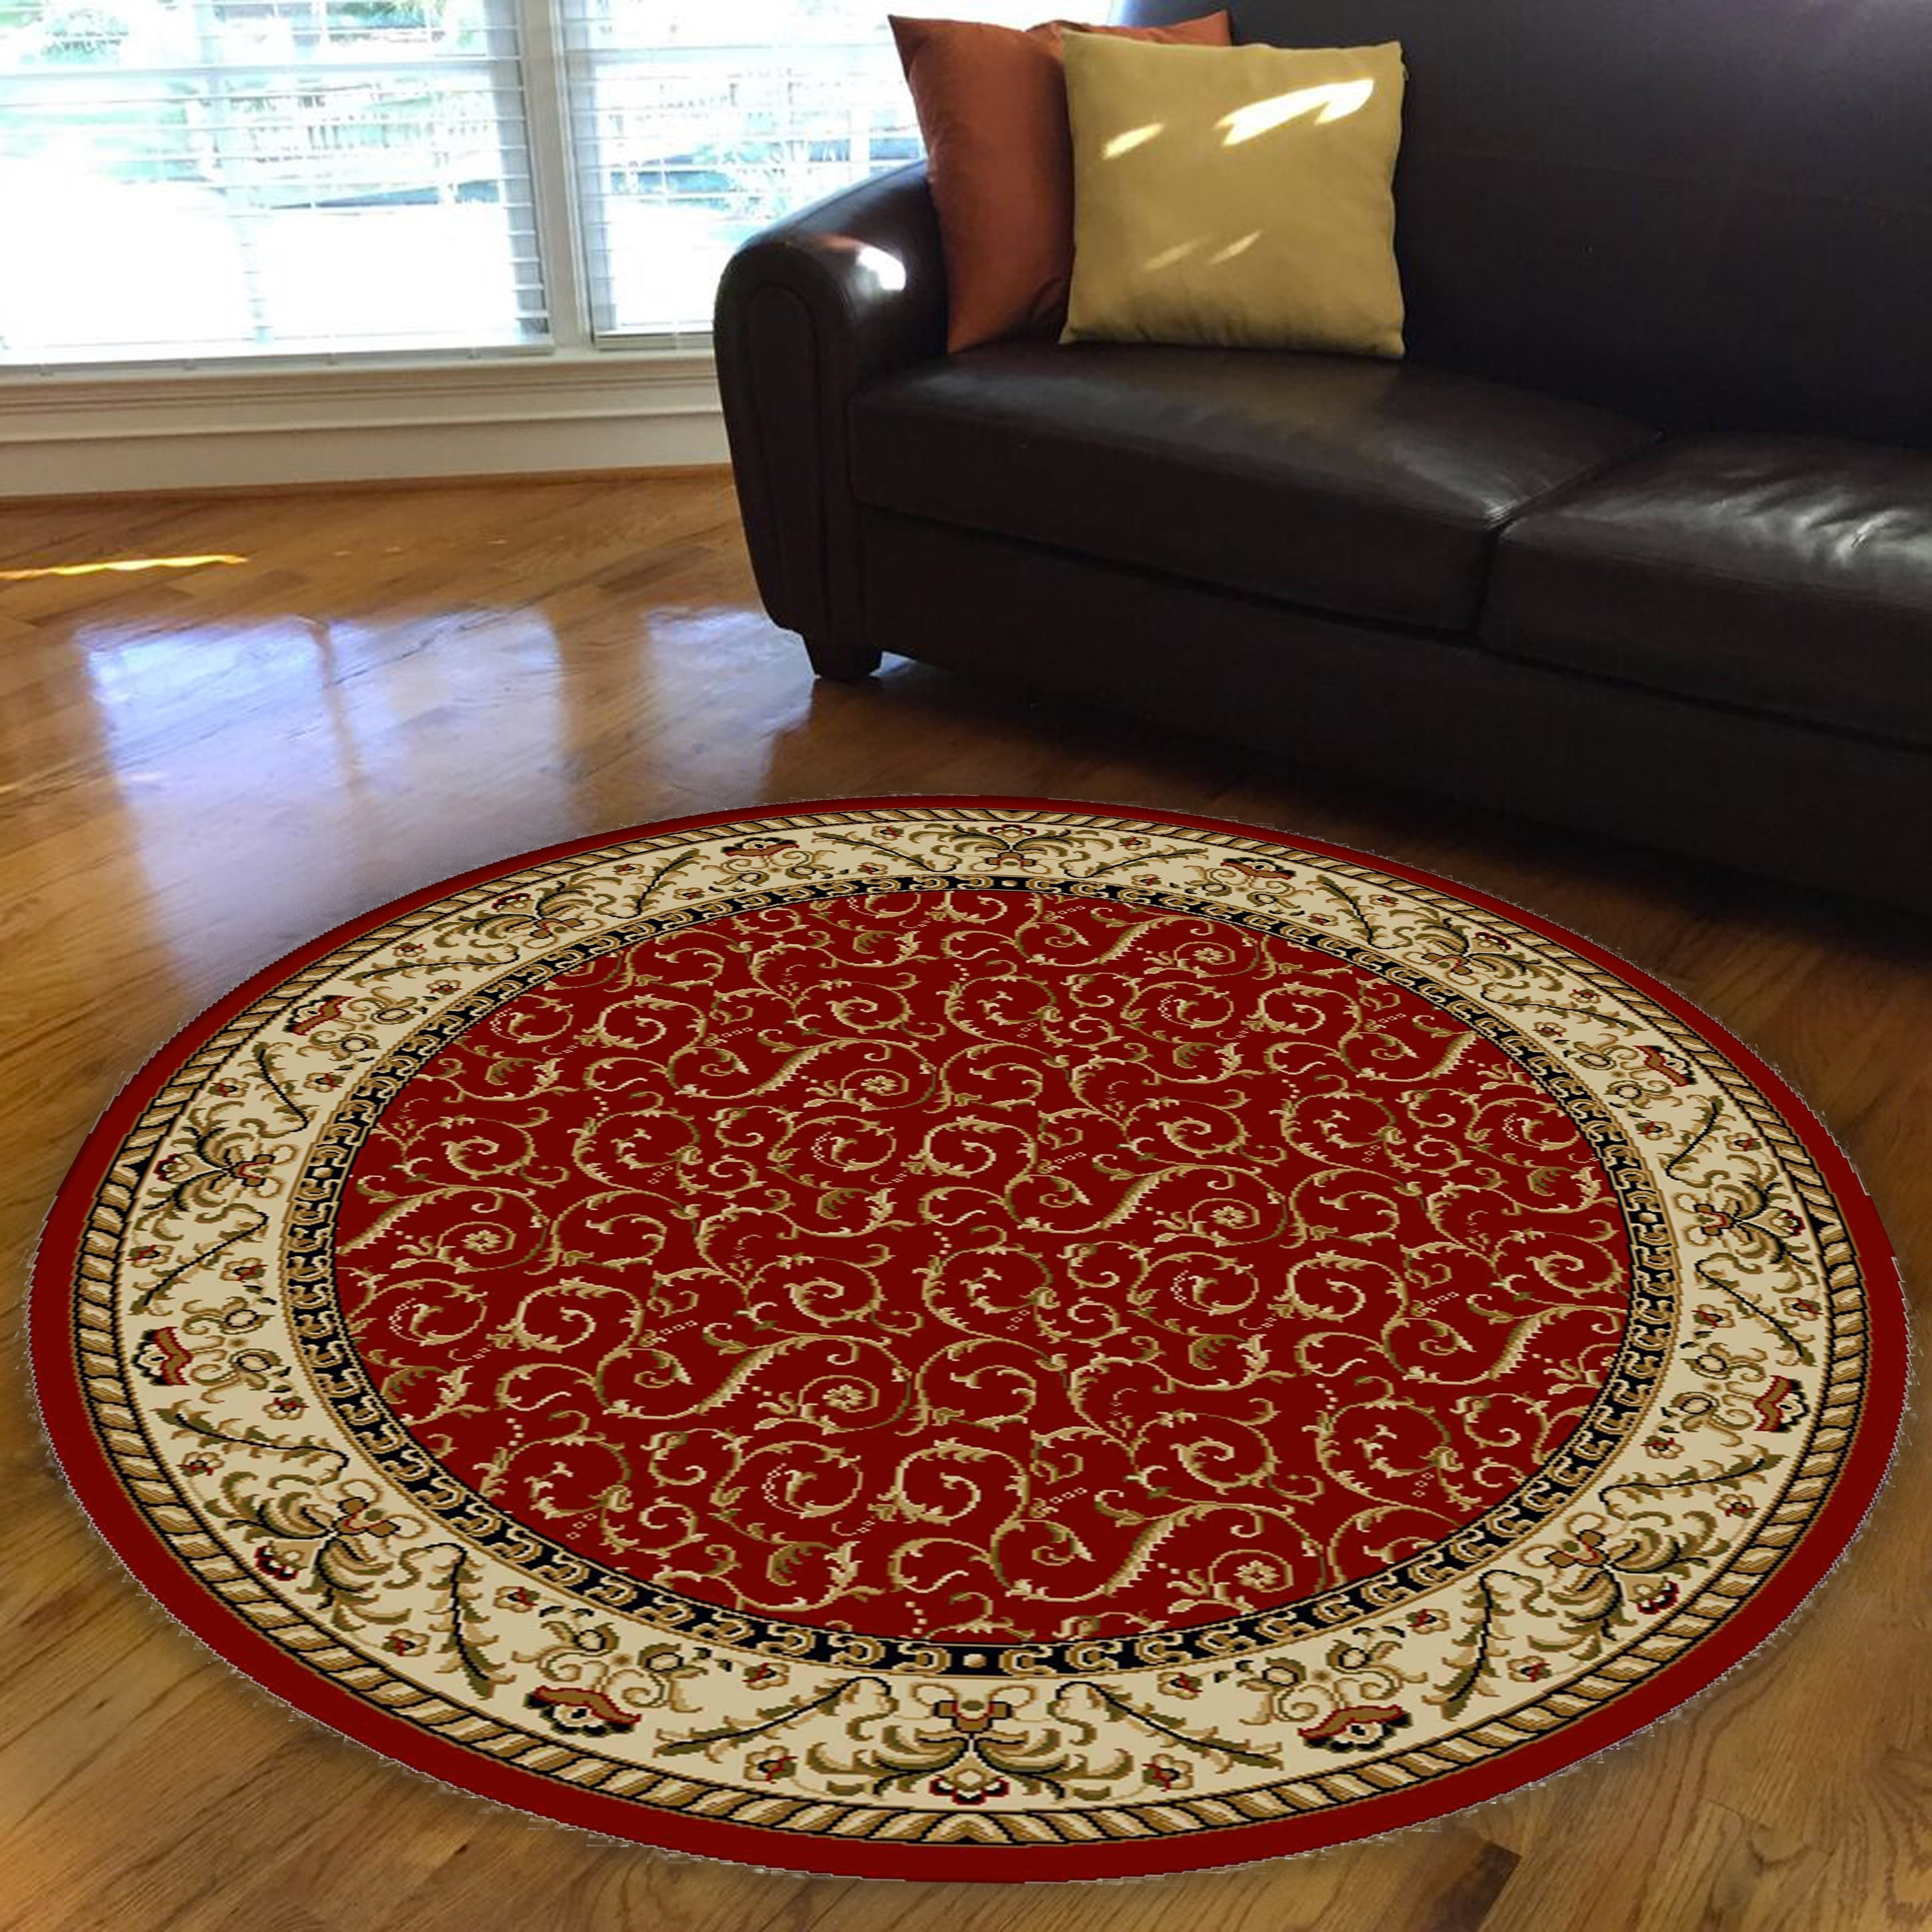 Dollhouse Vintage Coffee Red Rose Scroll Living Room Decor Area Rug 